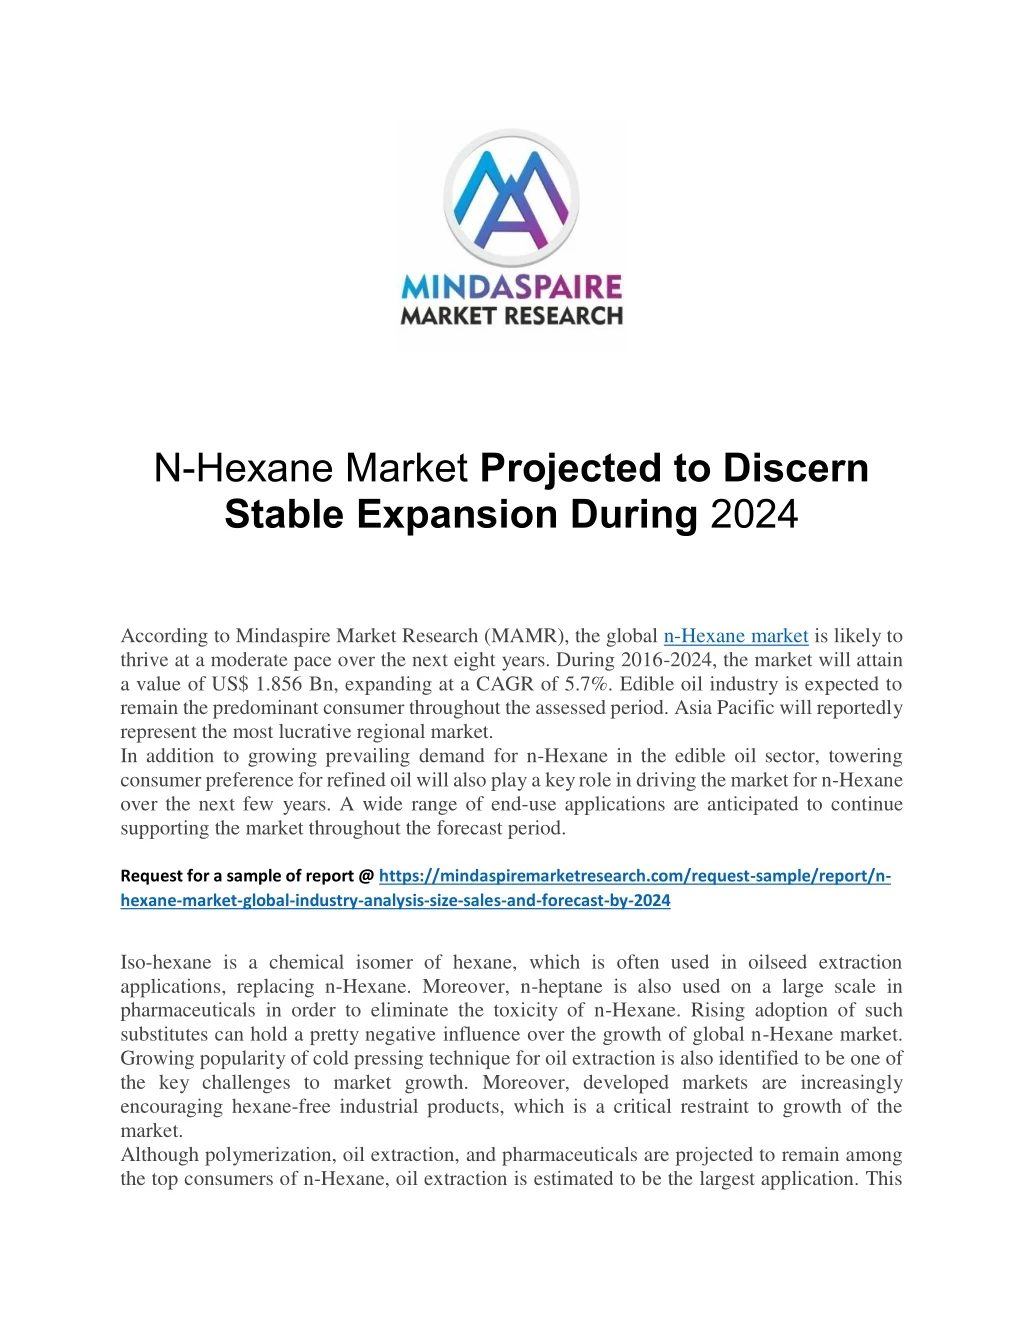 n hexane market projected to discern stable